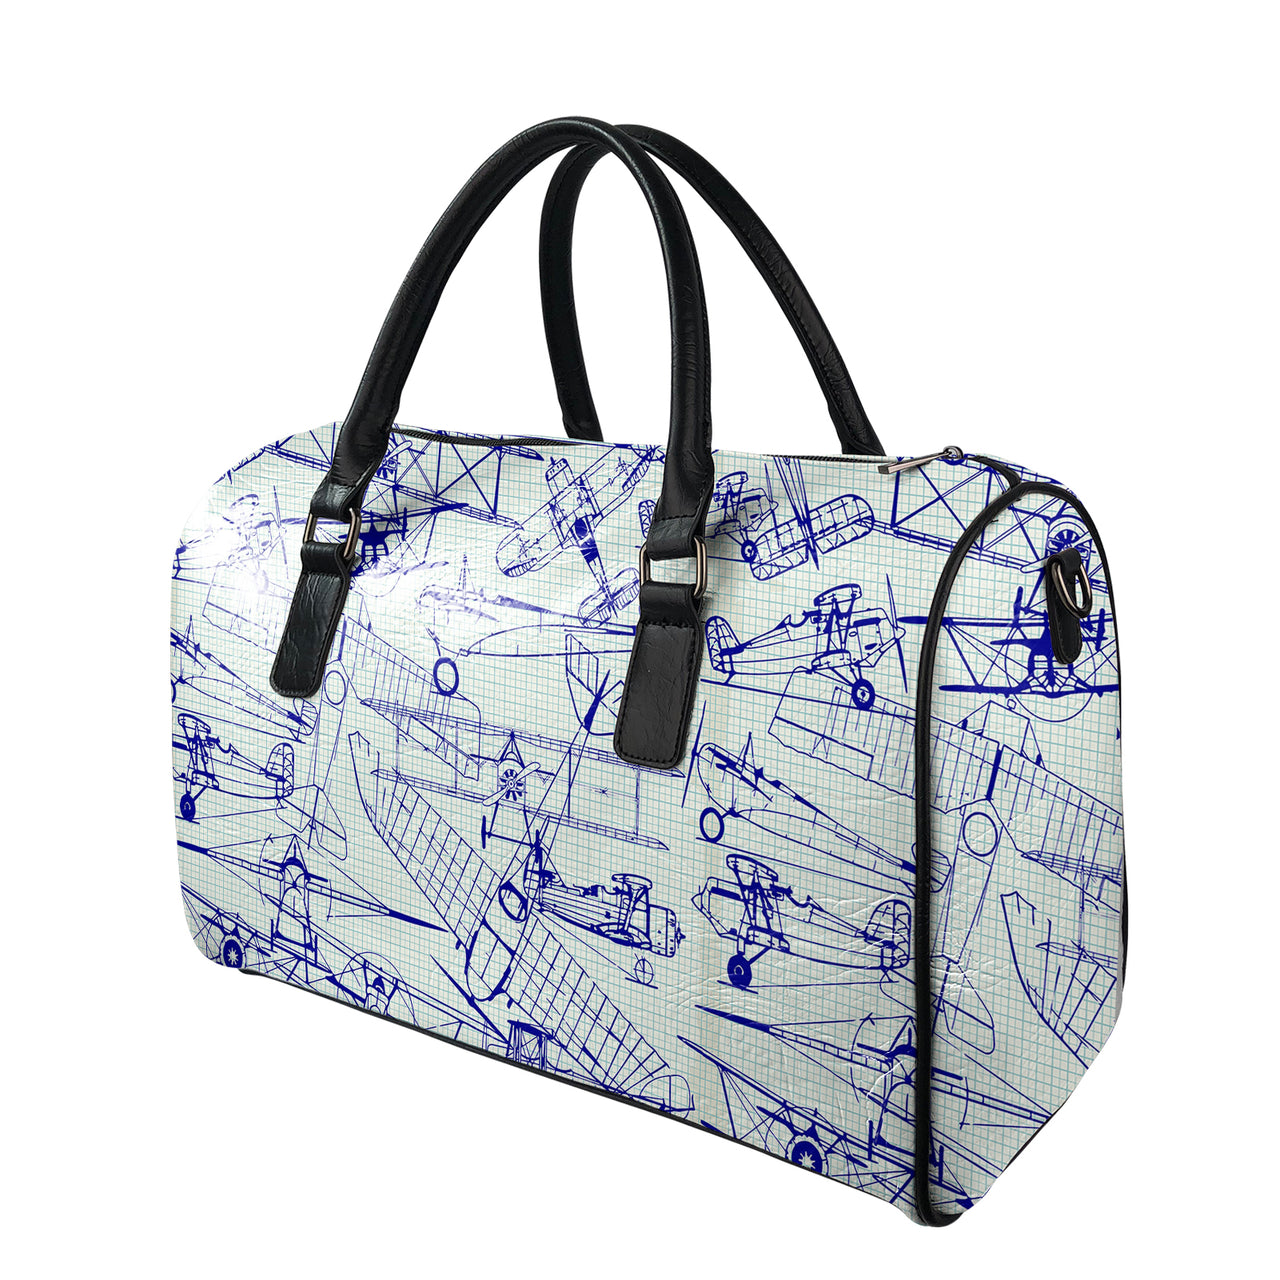 Amazing Drawings of Old Aircrafts Designed Leather Travel Bag